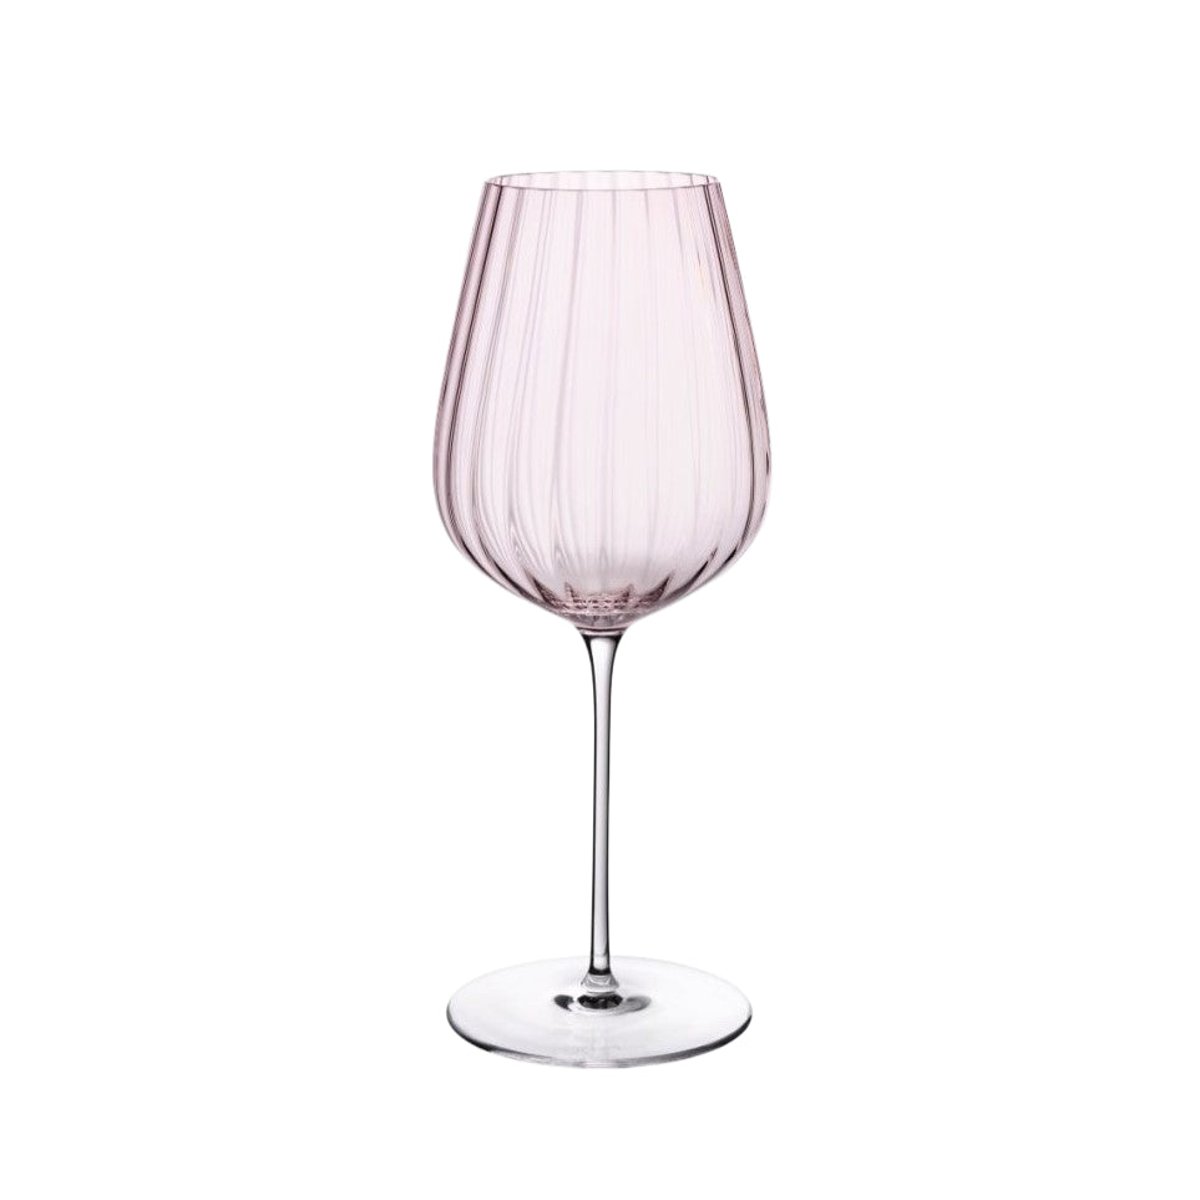 https://images.verishop.com/nude-glass-round-up-set-of-2-red-wine-glasses/M08693357597204-1330741337?auto=format&cs=strip&fit=max&w=1200